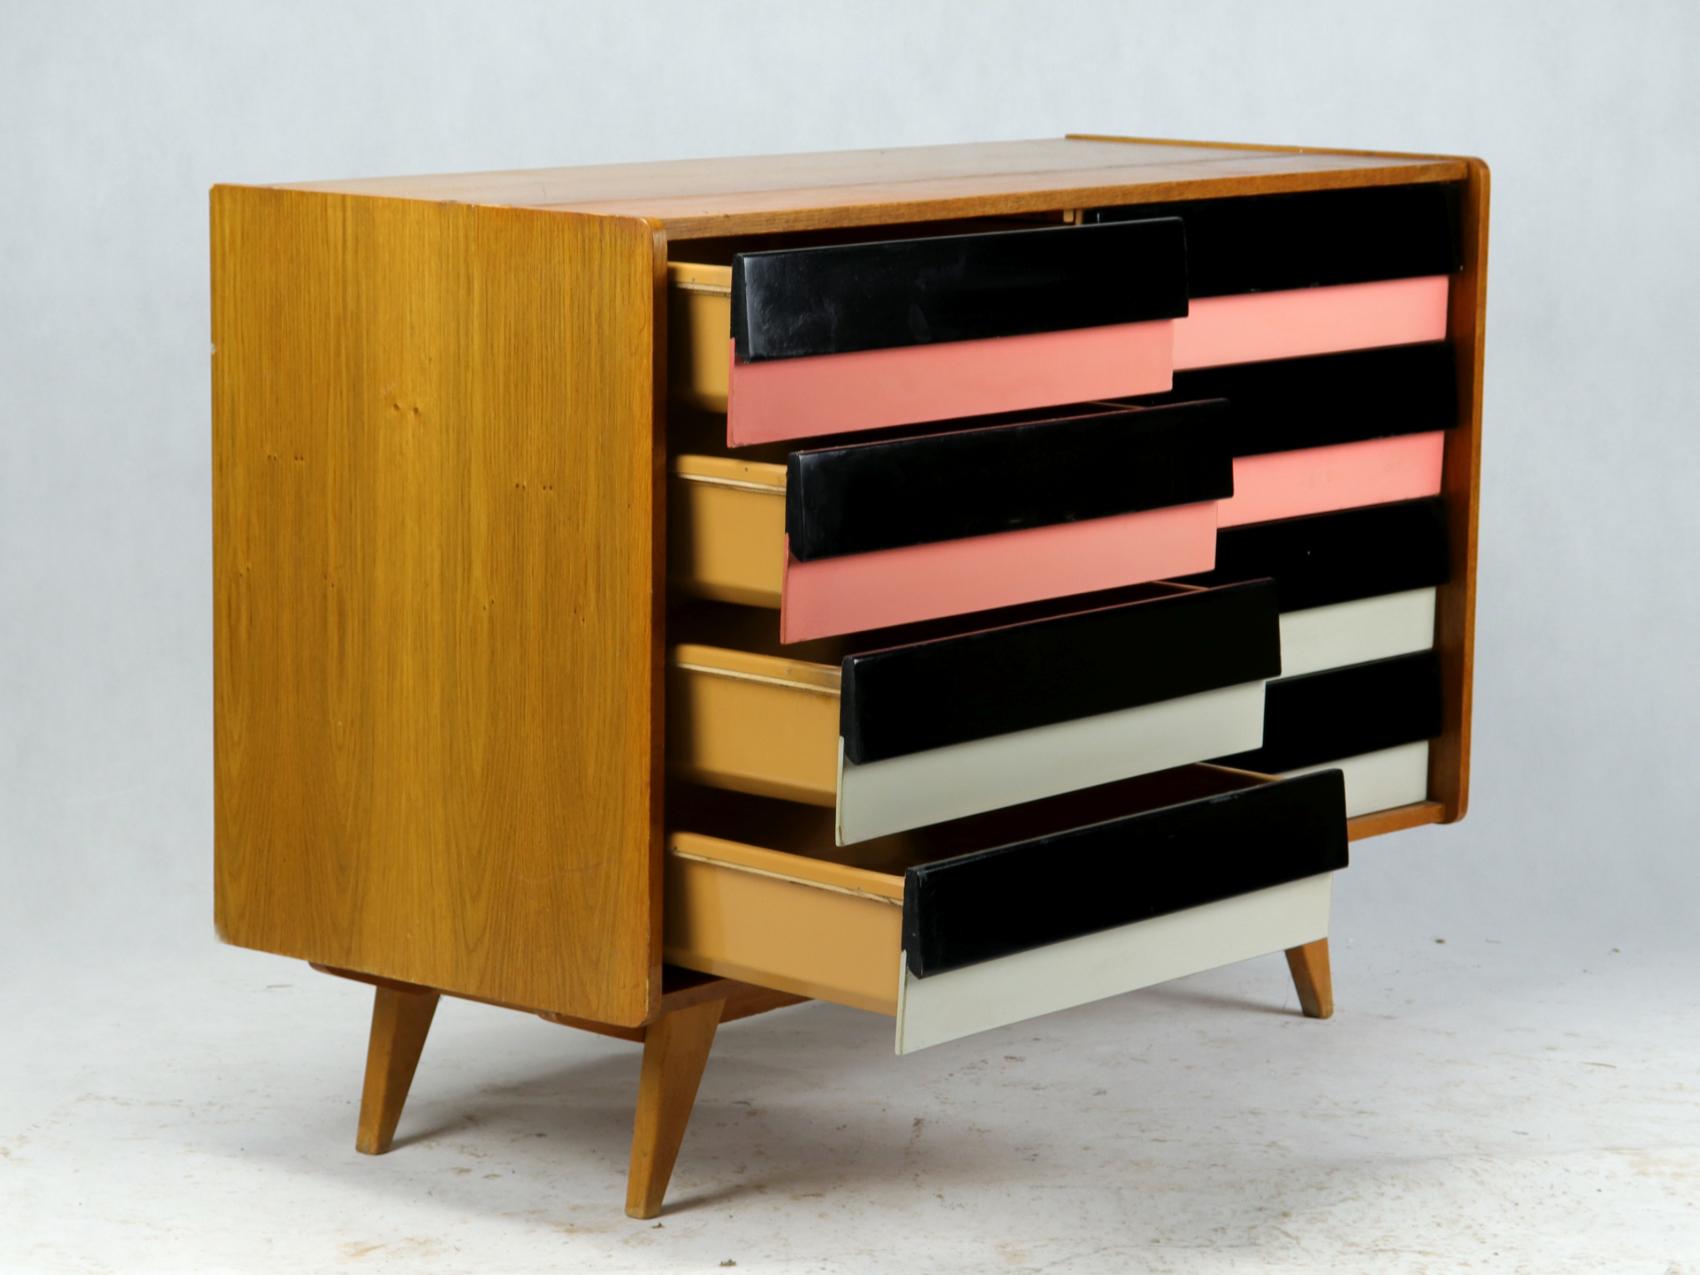 An iconic cabinet, a part of the series U-450, designed by the Czech designer Jirí Jiroutek for the national enterprise Interier Praha. He began to work on U-450 series right after the ´58 Expo exhibition in Brussels. The success of the Czech